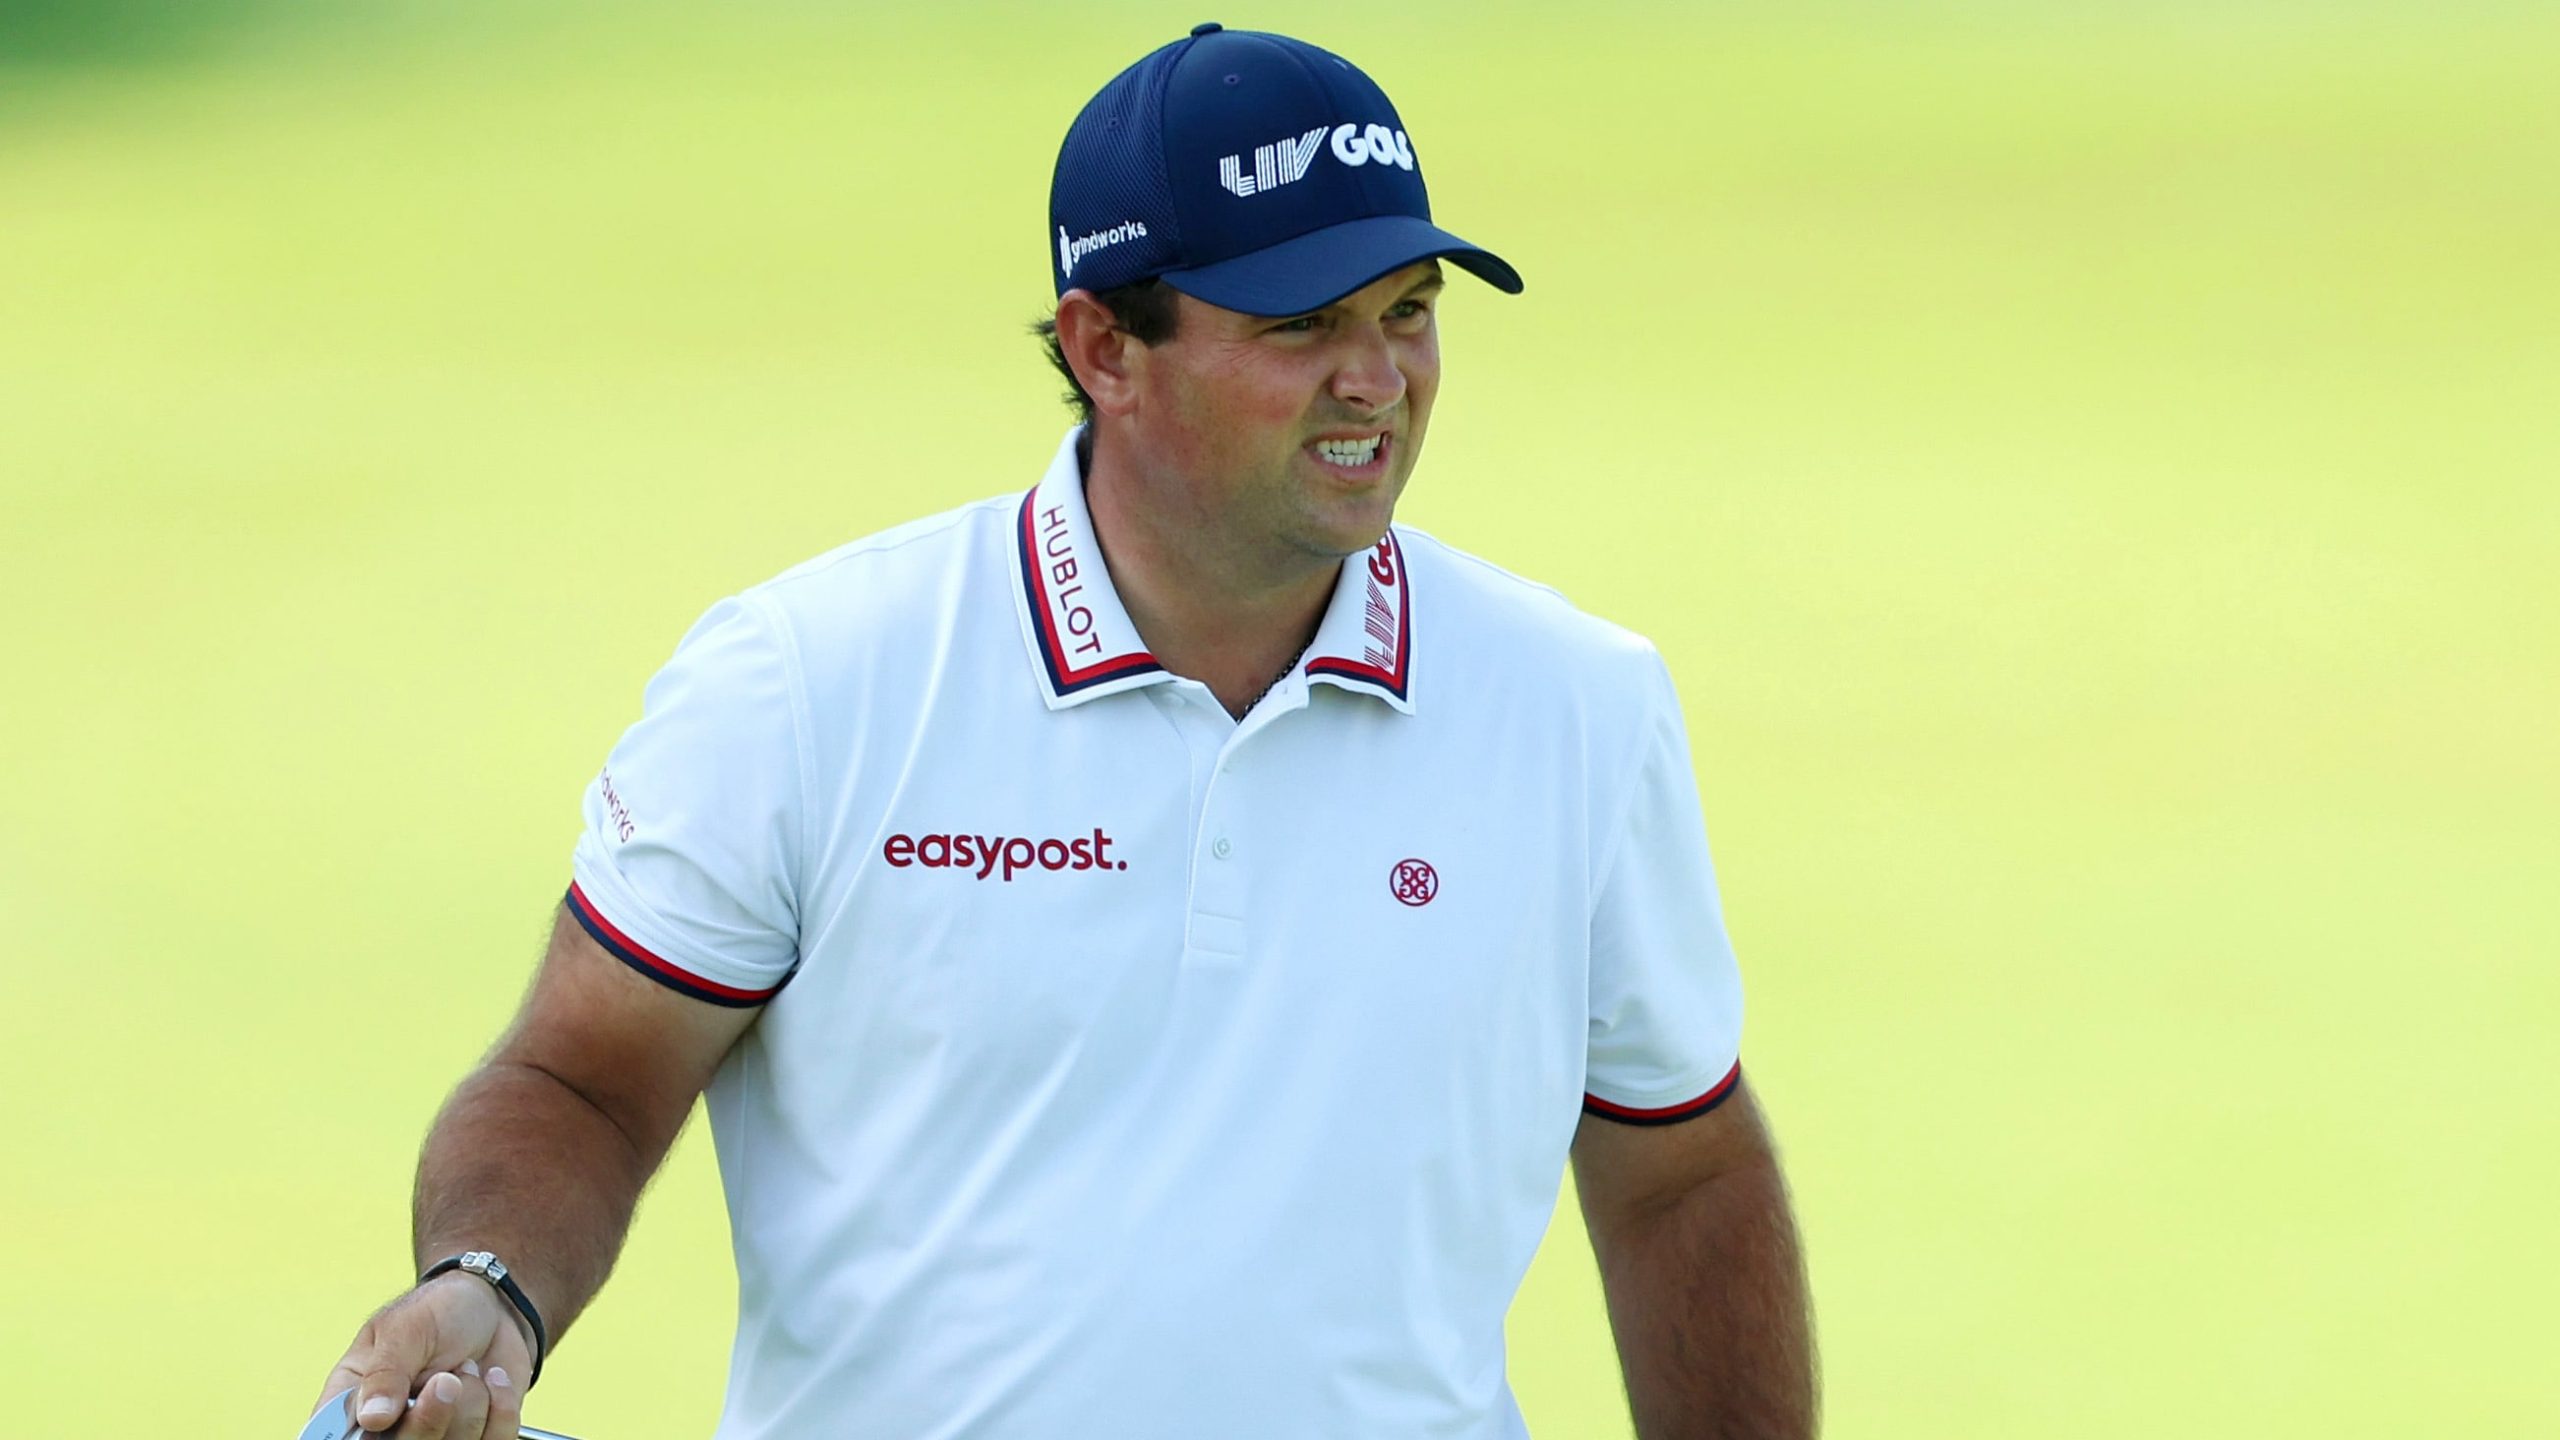 From tee to tree: Patrick Reed gets ball stuck in palm, trails Rory McIlroy in Dubai